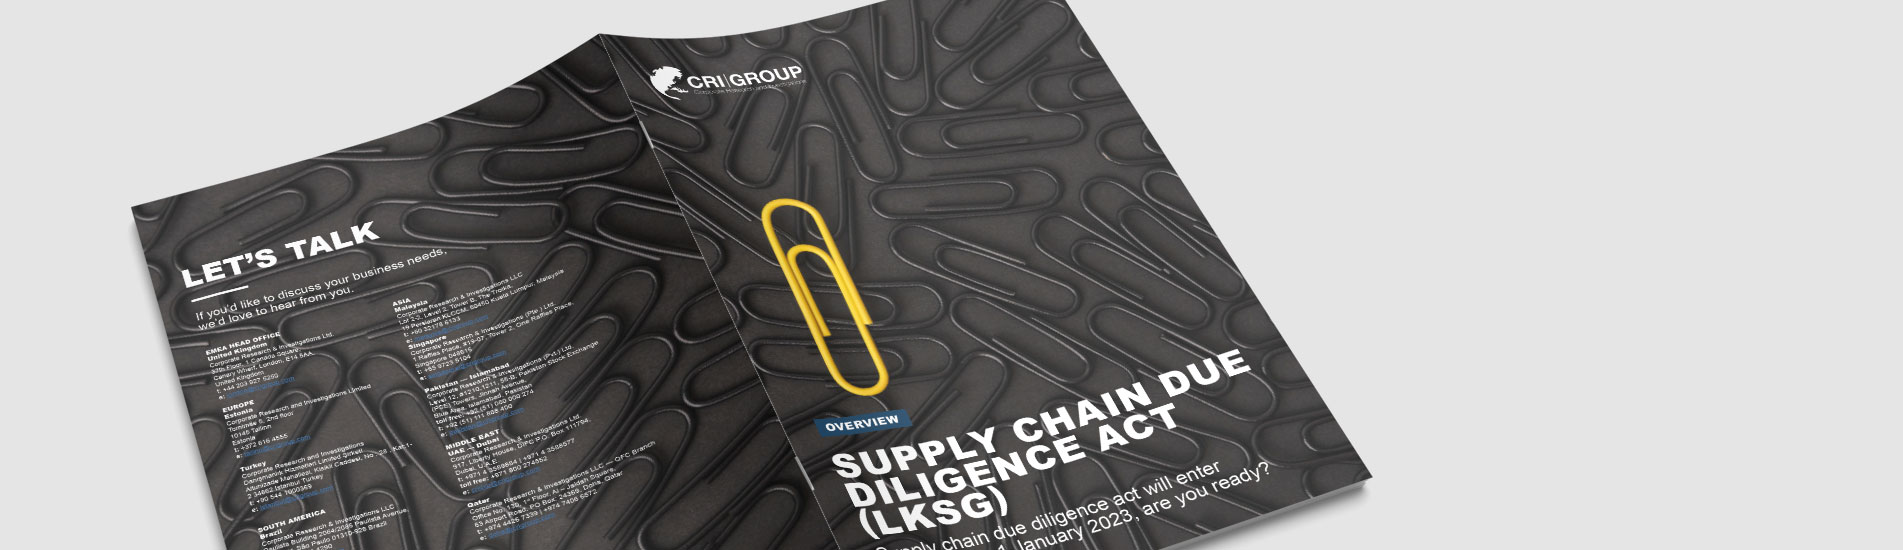 FREE eBook | Supply Chain Due Diligence Act (LkSG)